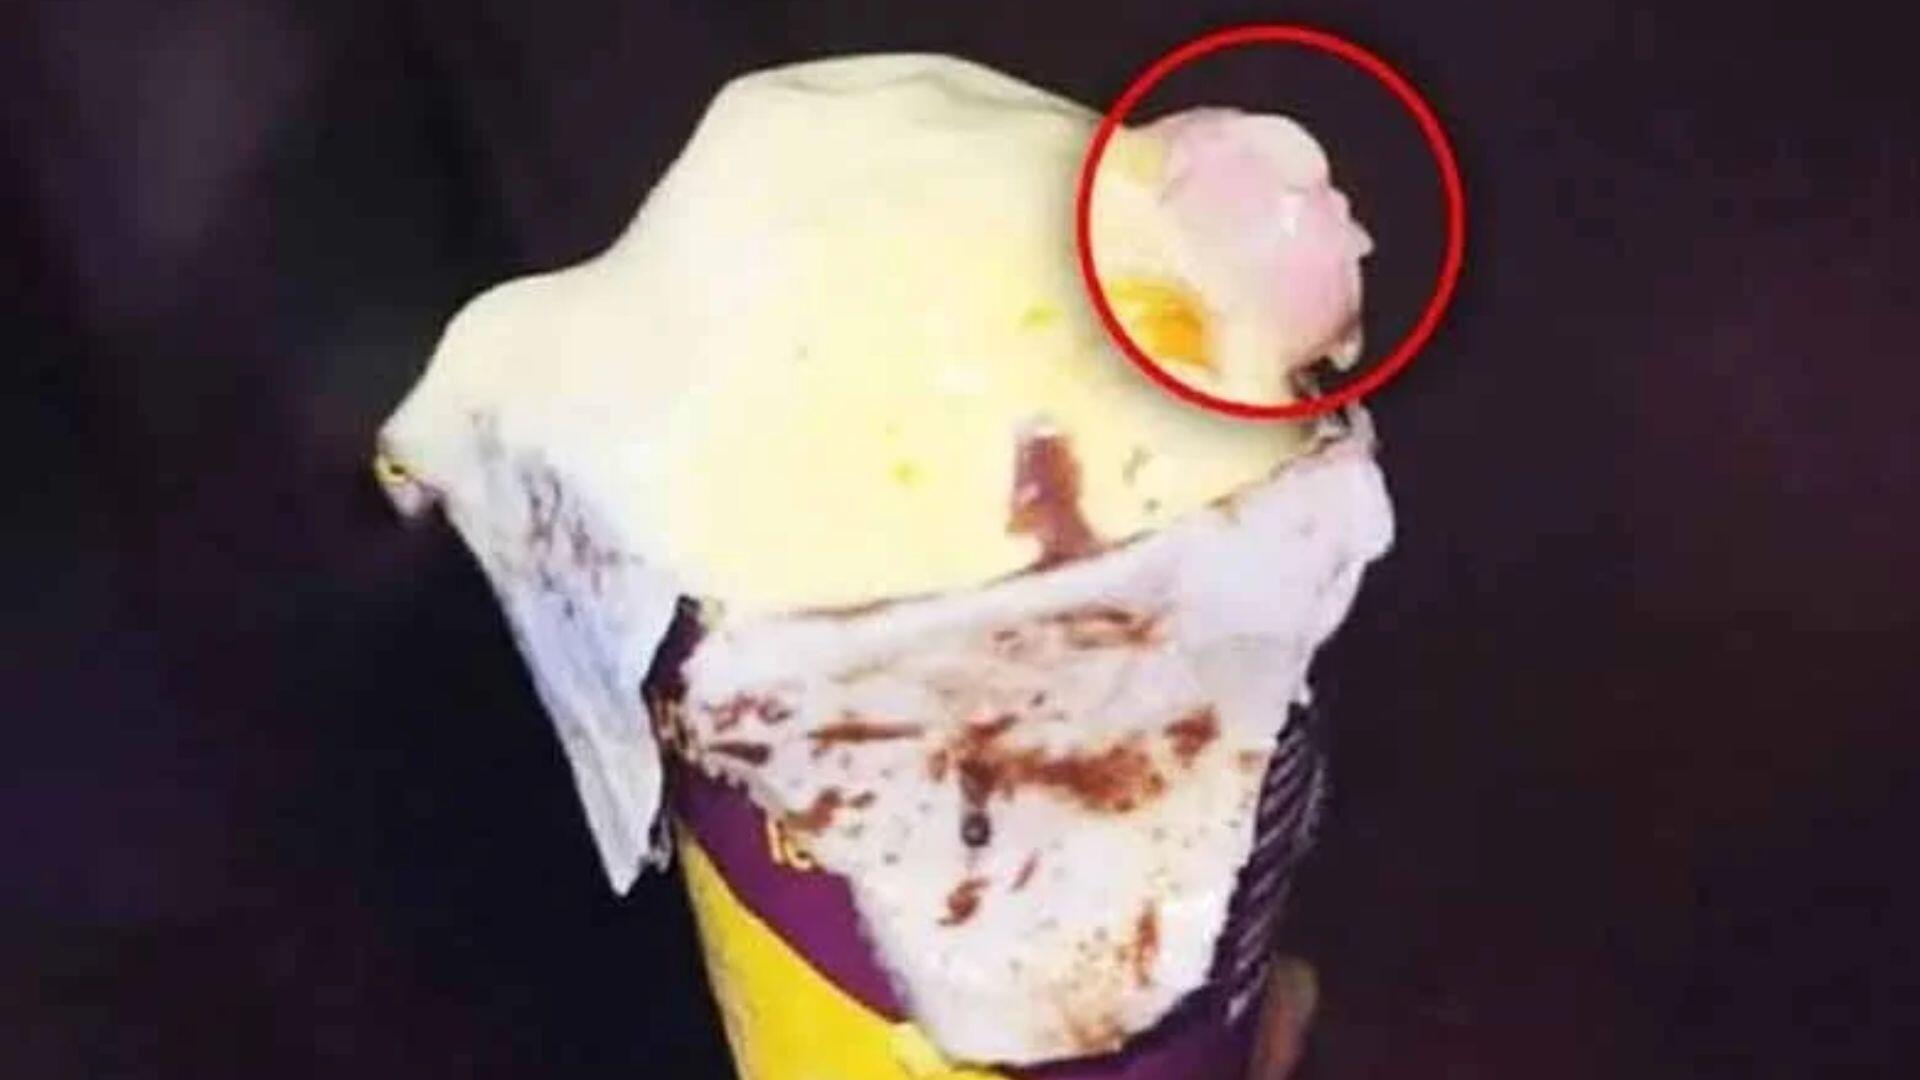 Human Finger In Ice Cream: Factory Worker Who Lost Part Of Finger Identified